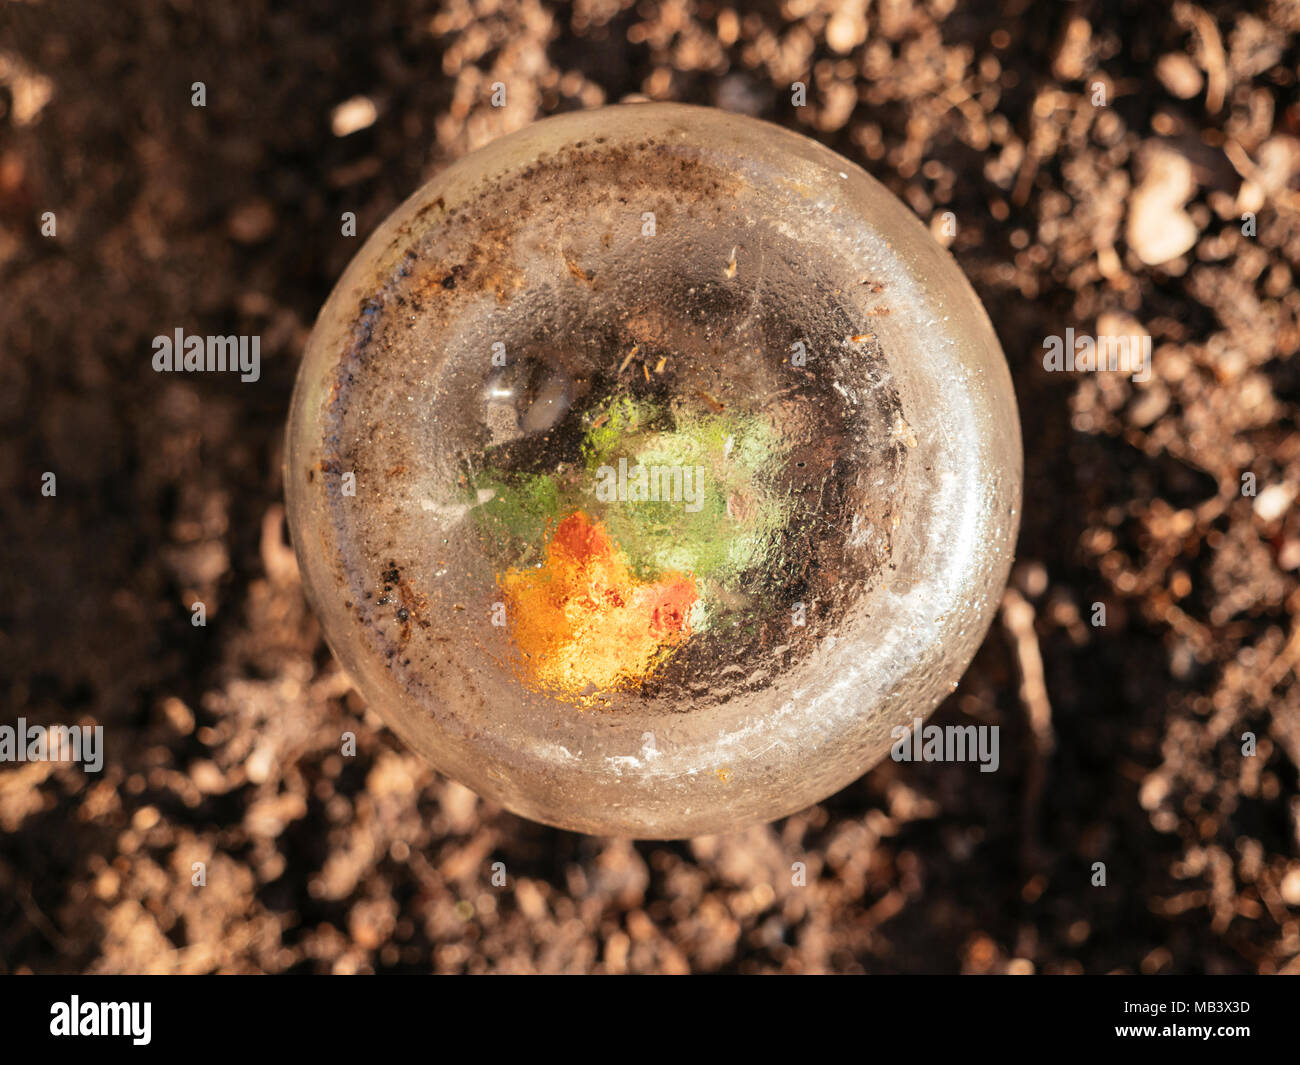 Marigolds protected against frost with old canning jars in early spring. Stock Photo